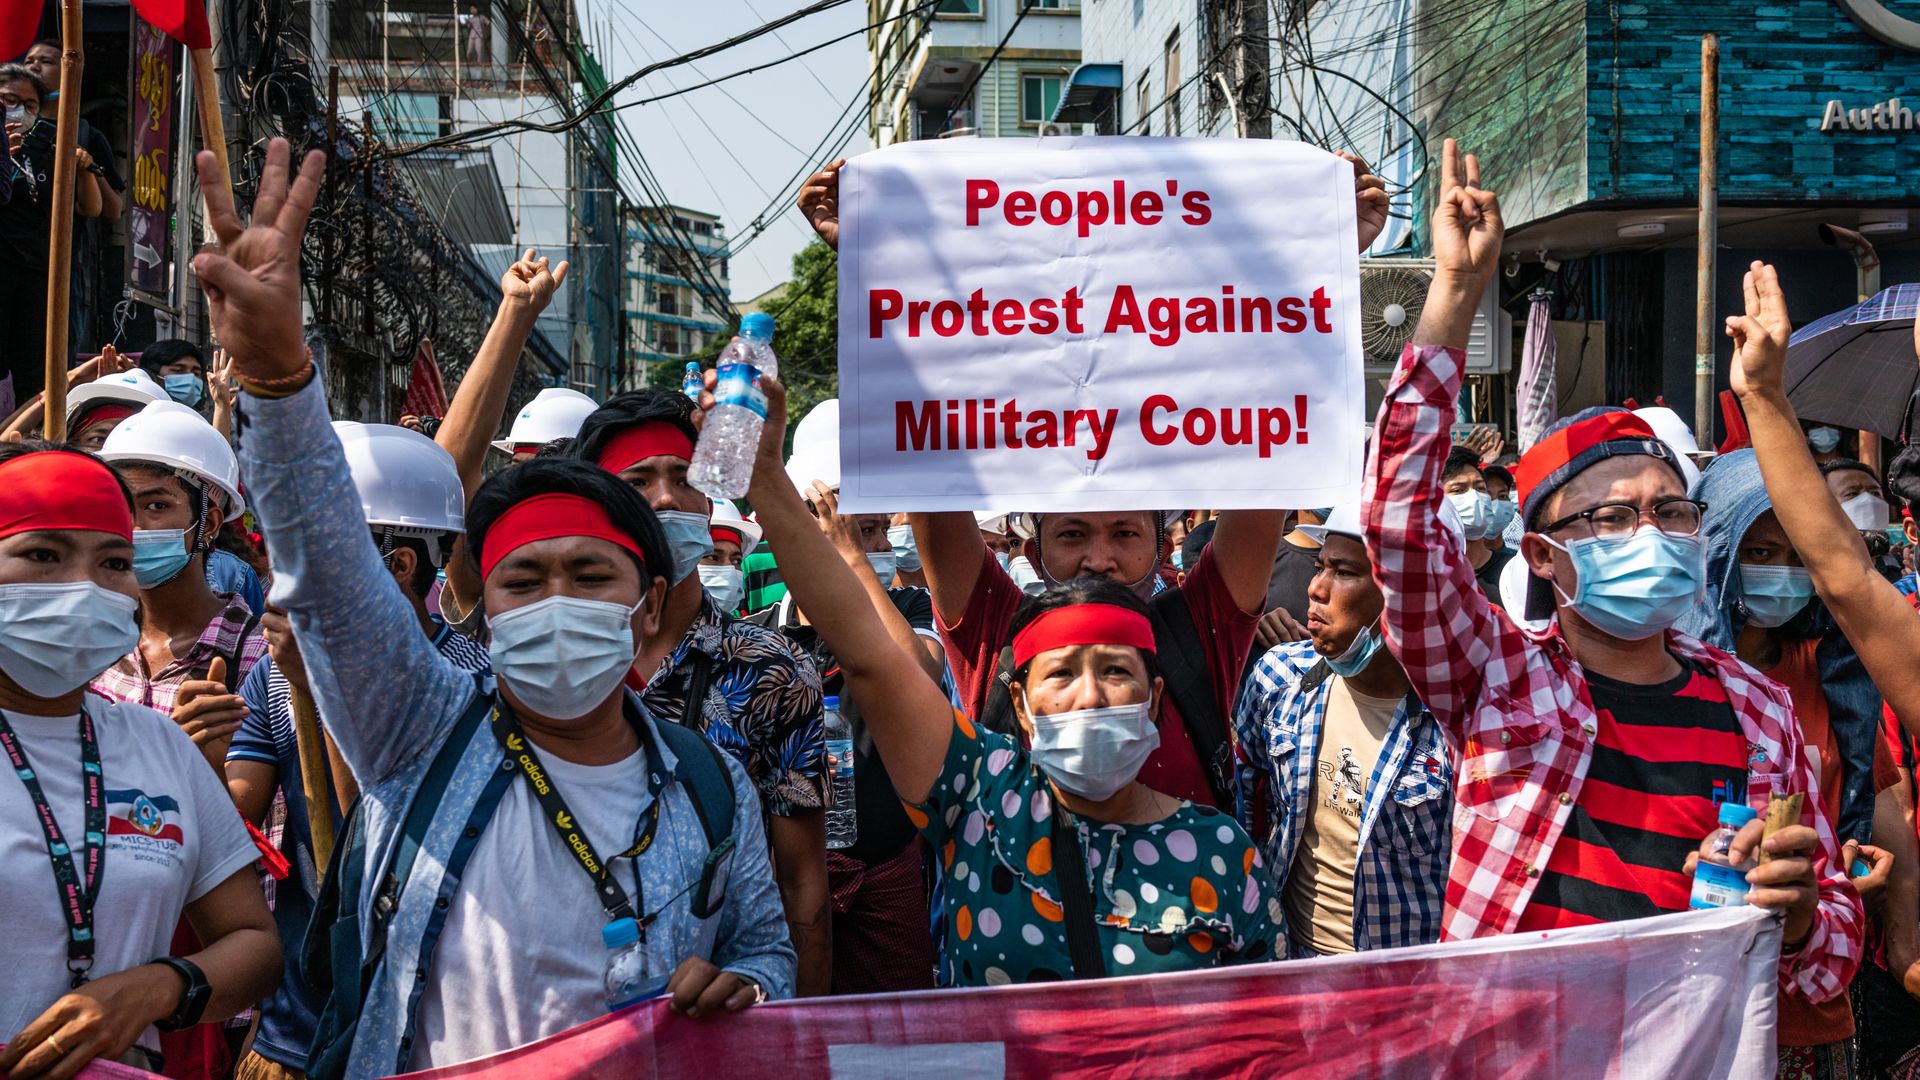 Protesters take to the street against the military coup in Myanmar. Photo: Photo by Getty Images/Getty Images